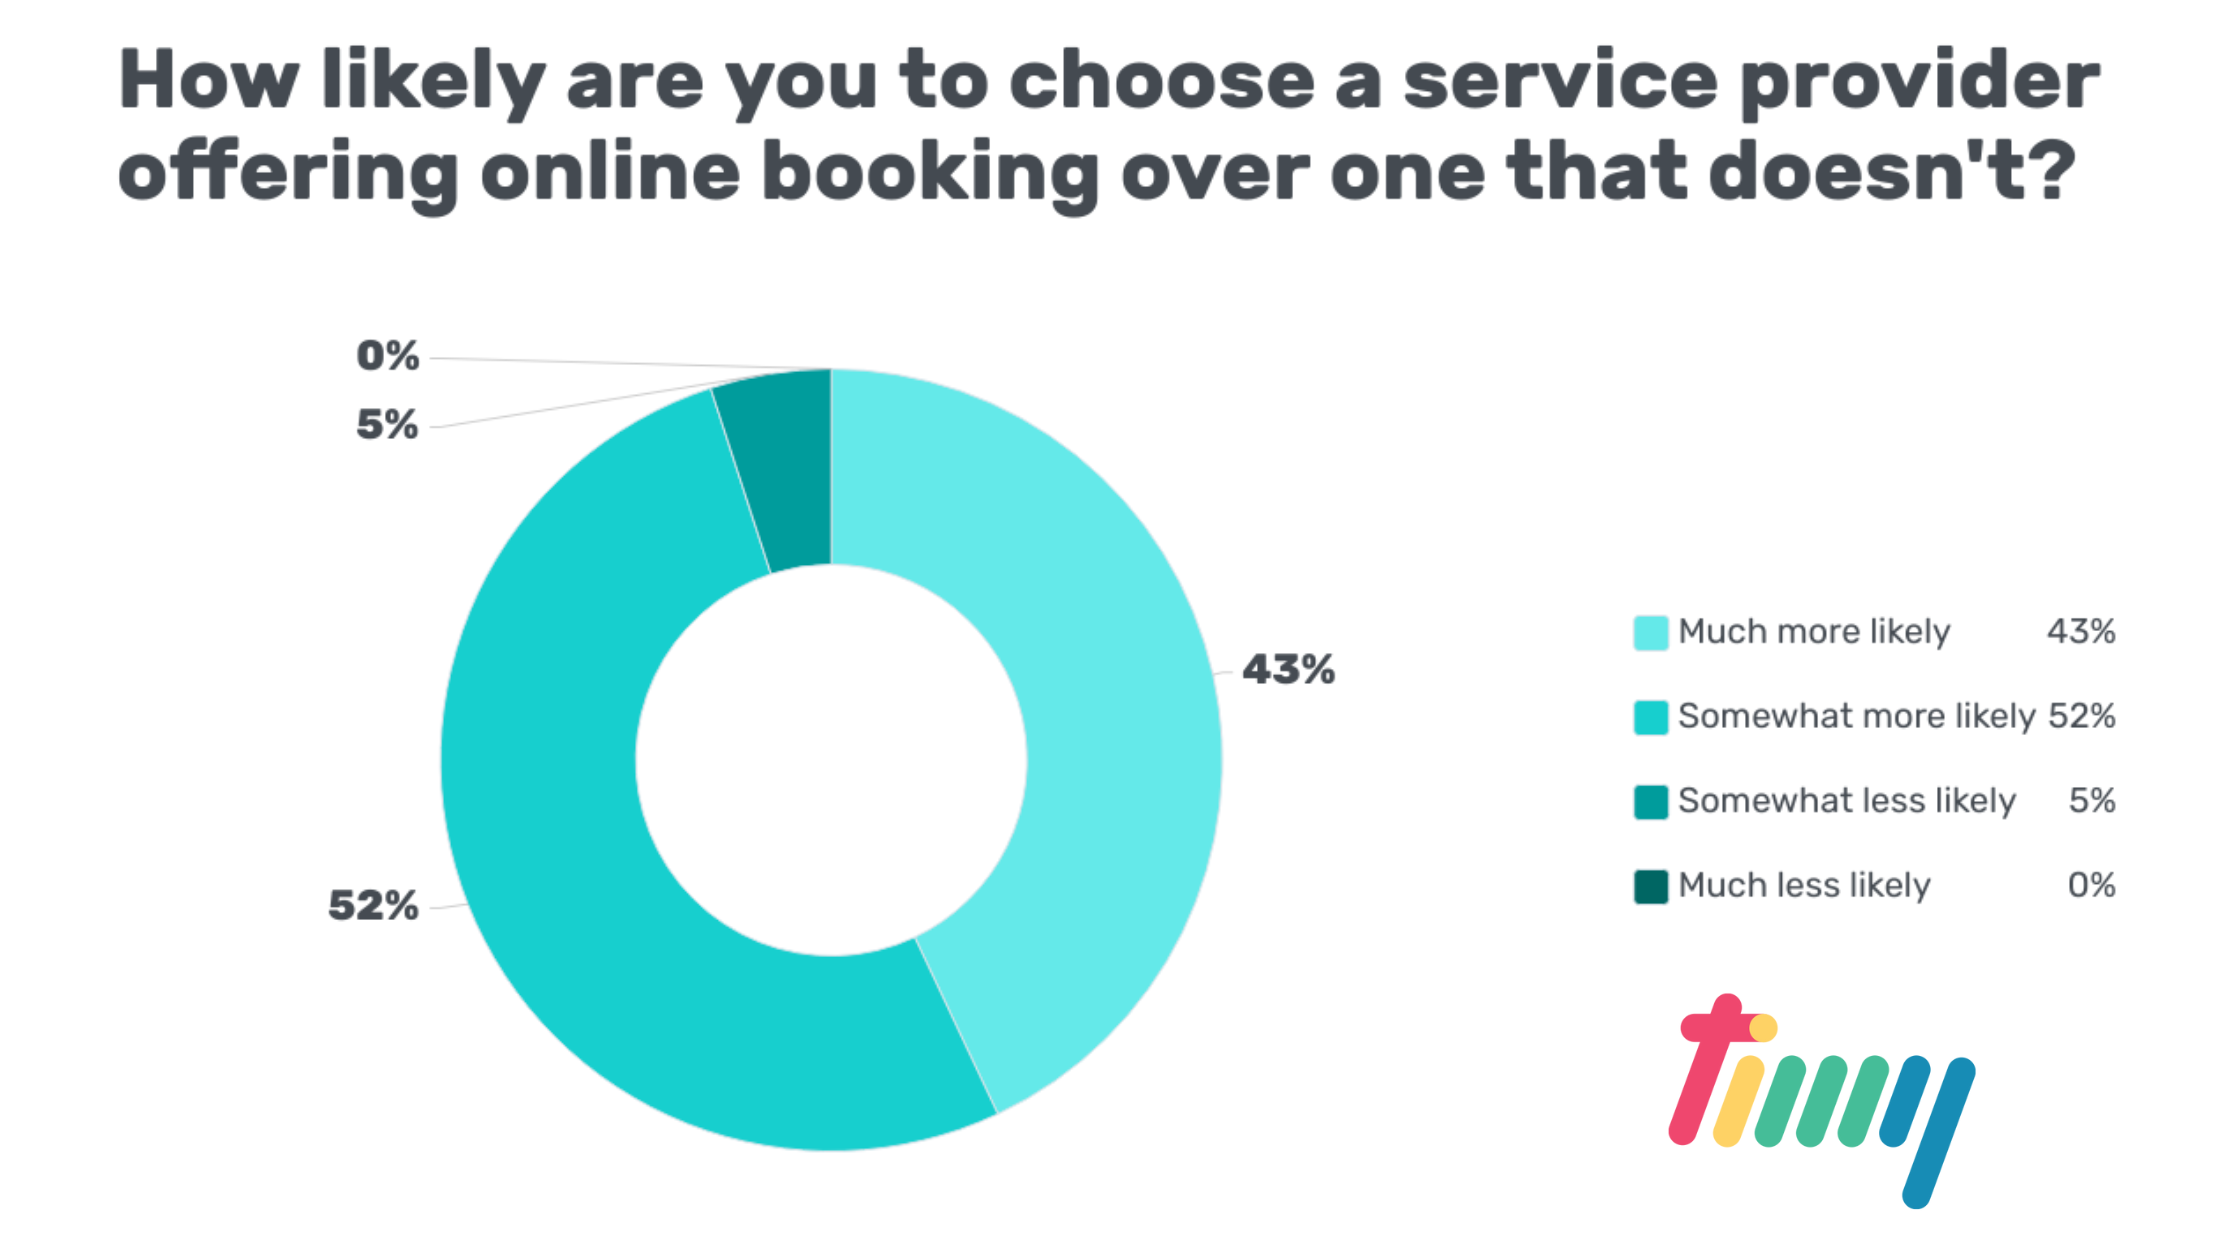 Online Appointment Scheduling - How likely are you to choose a service provider offering online booking over one that doesn't?